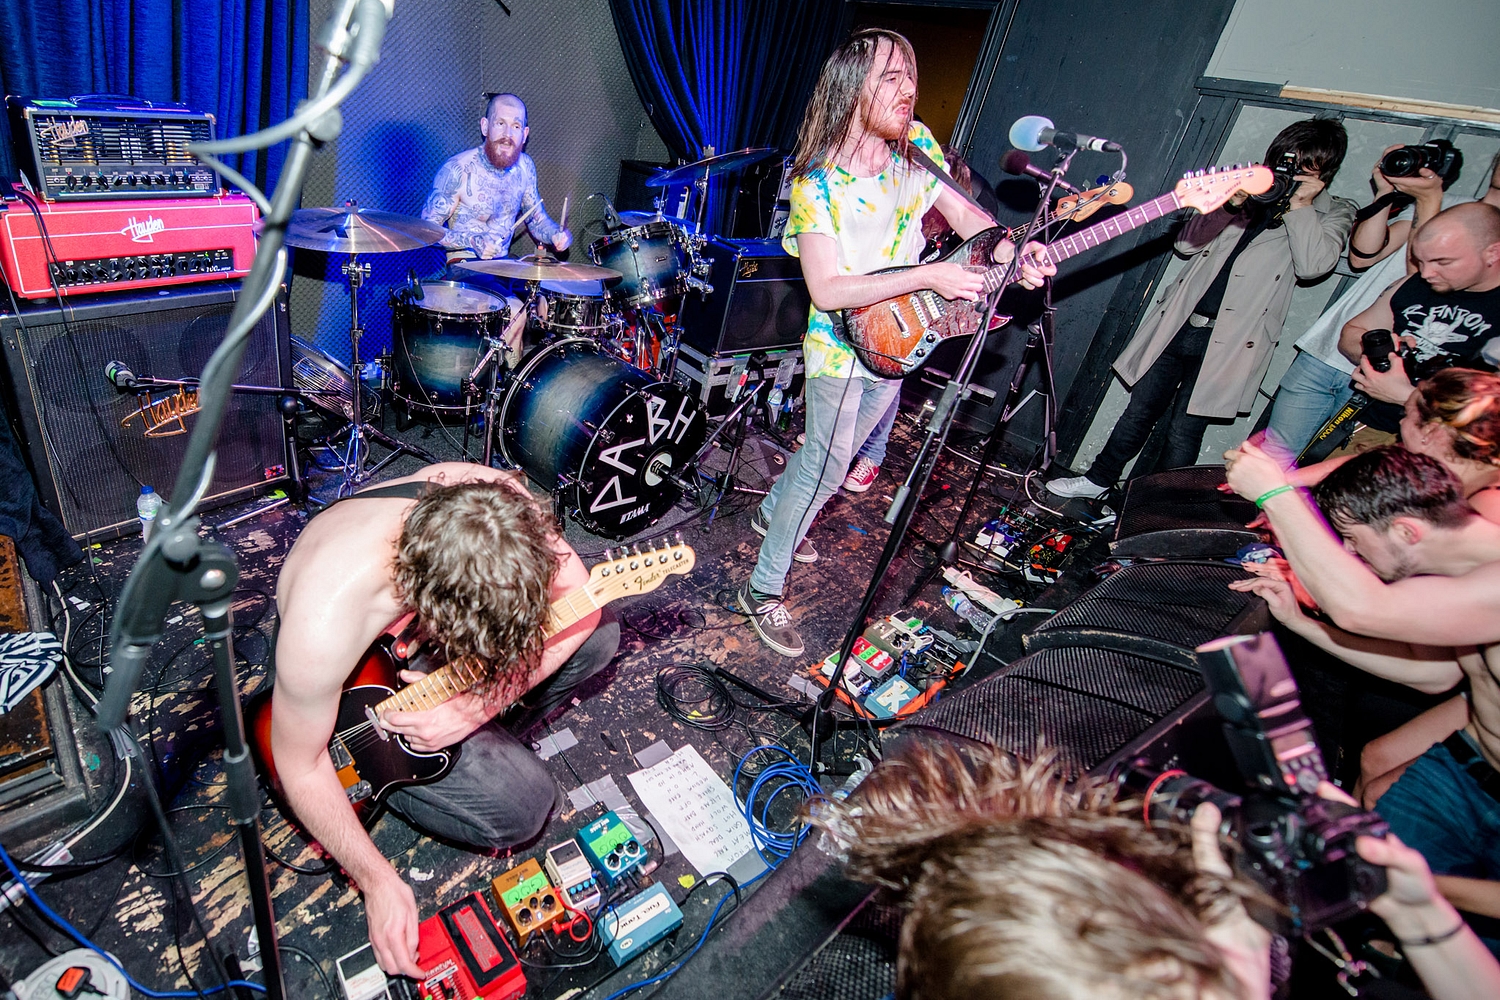 Pulled Apart By Horses show off new material at tiny Camden gig